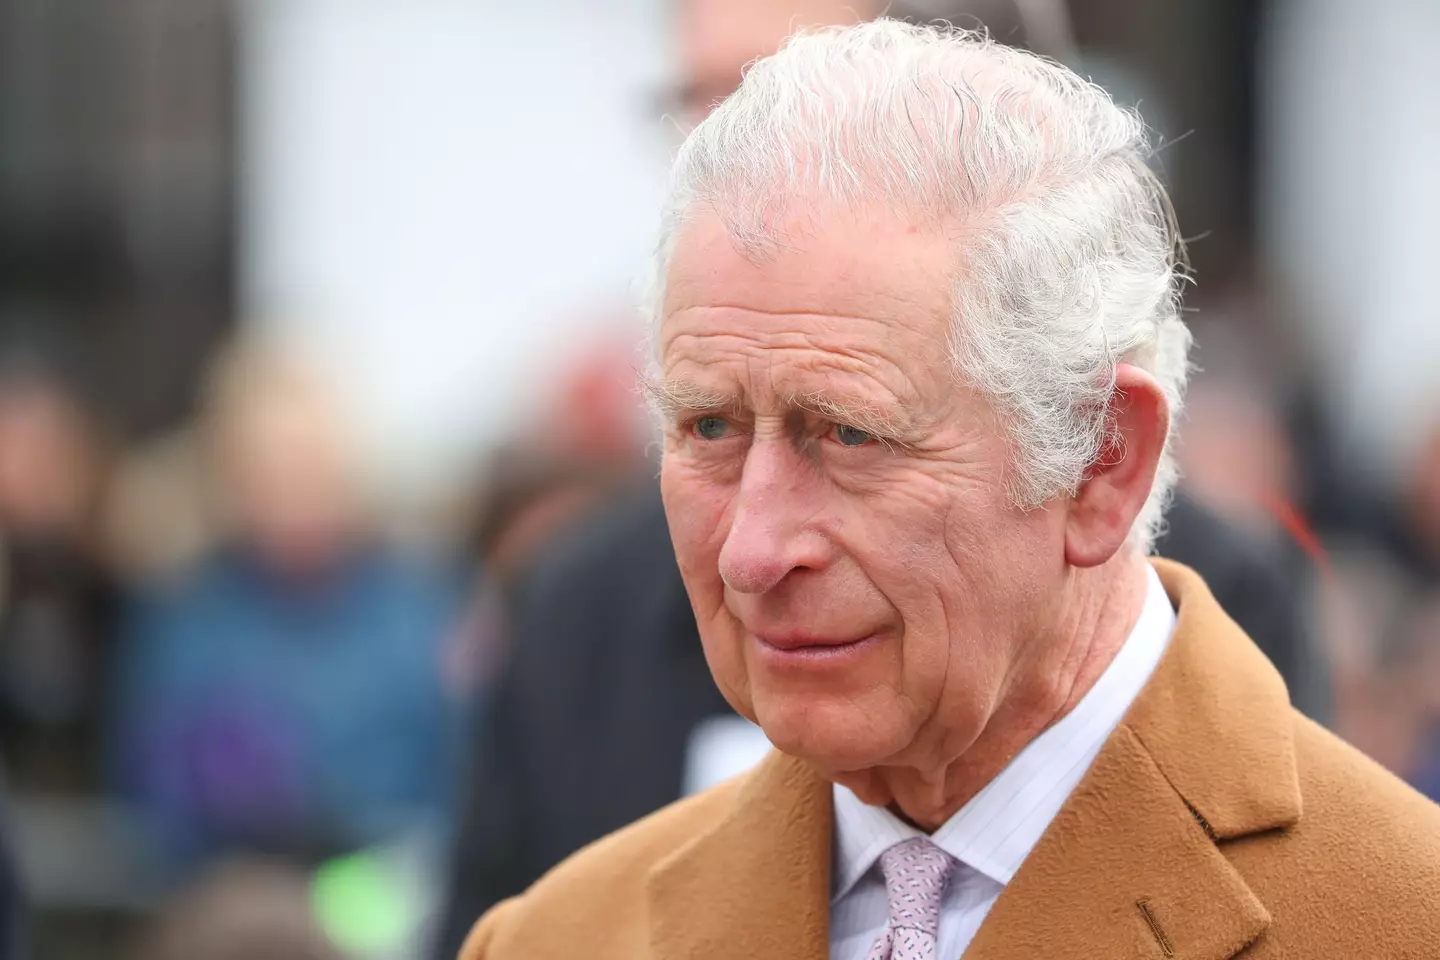 Prince Charles will now be proclaimed king.